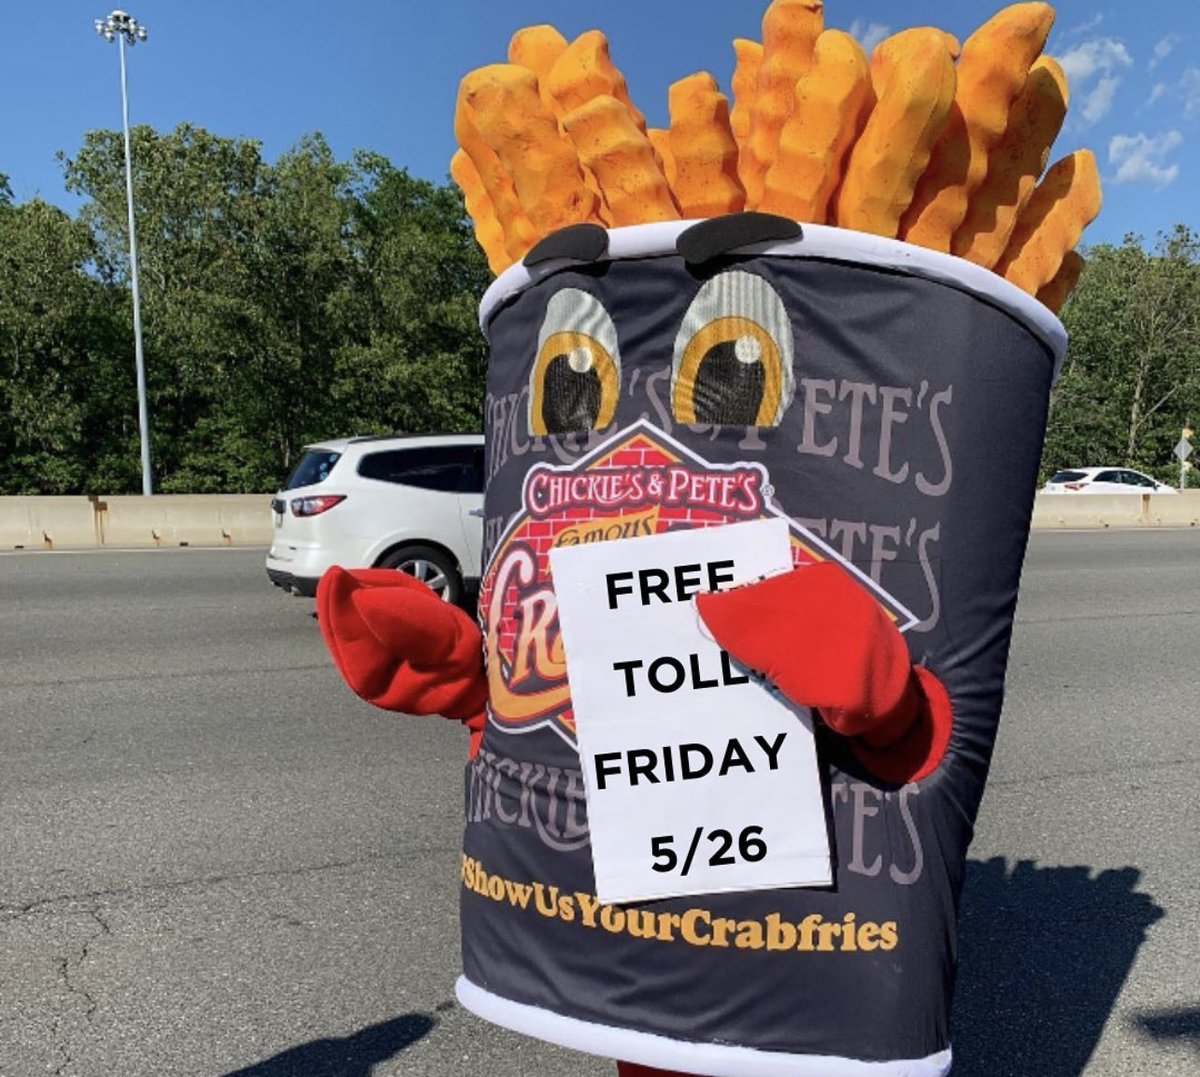 If you’re traveling to the beach on the AC Expressway today… free tolls from 5-6pm & free crabfries at the Farley Plaza thanks to @ChickiesnPetes 🍟 @CBSPhiladelphia